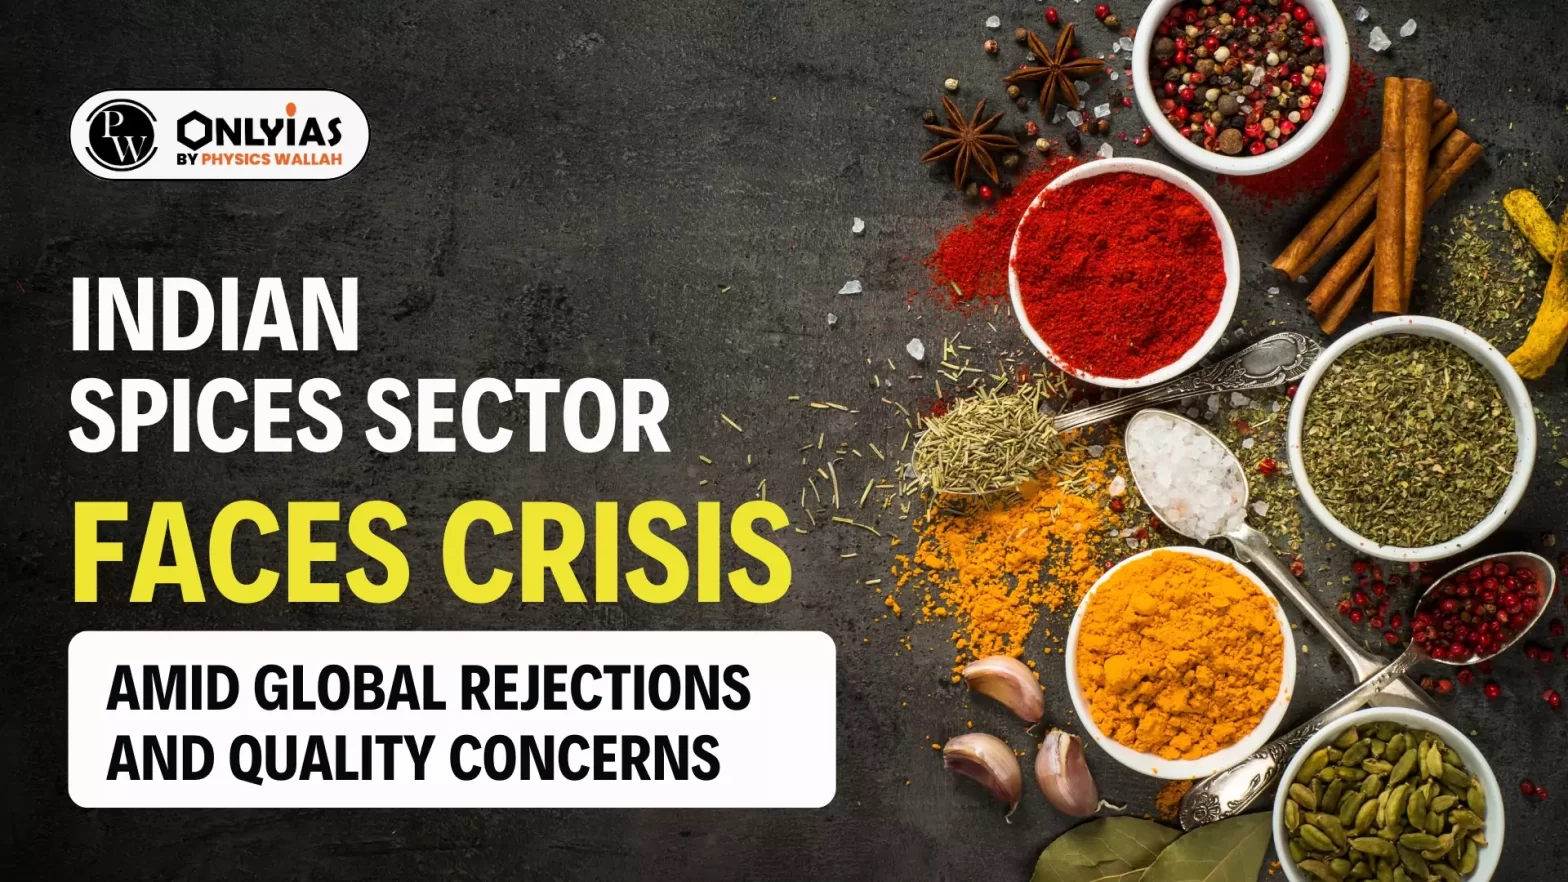 Indian Spices Sector Faces Crisis Amid Global Rejections and Quality Concerns